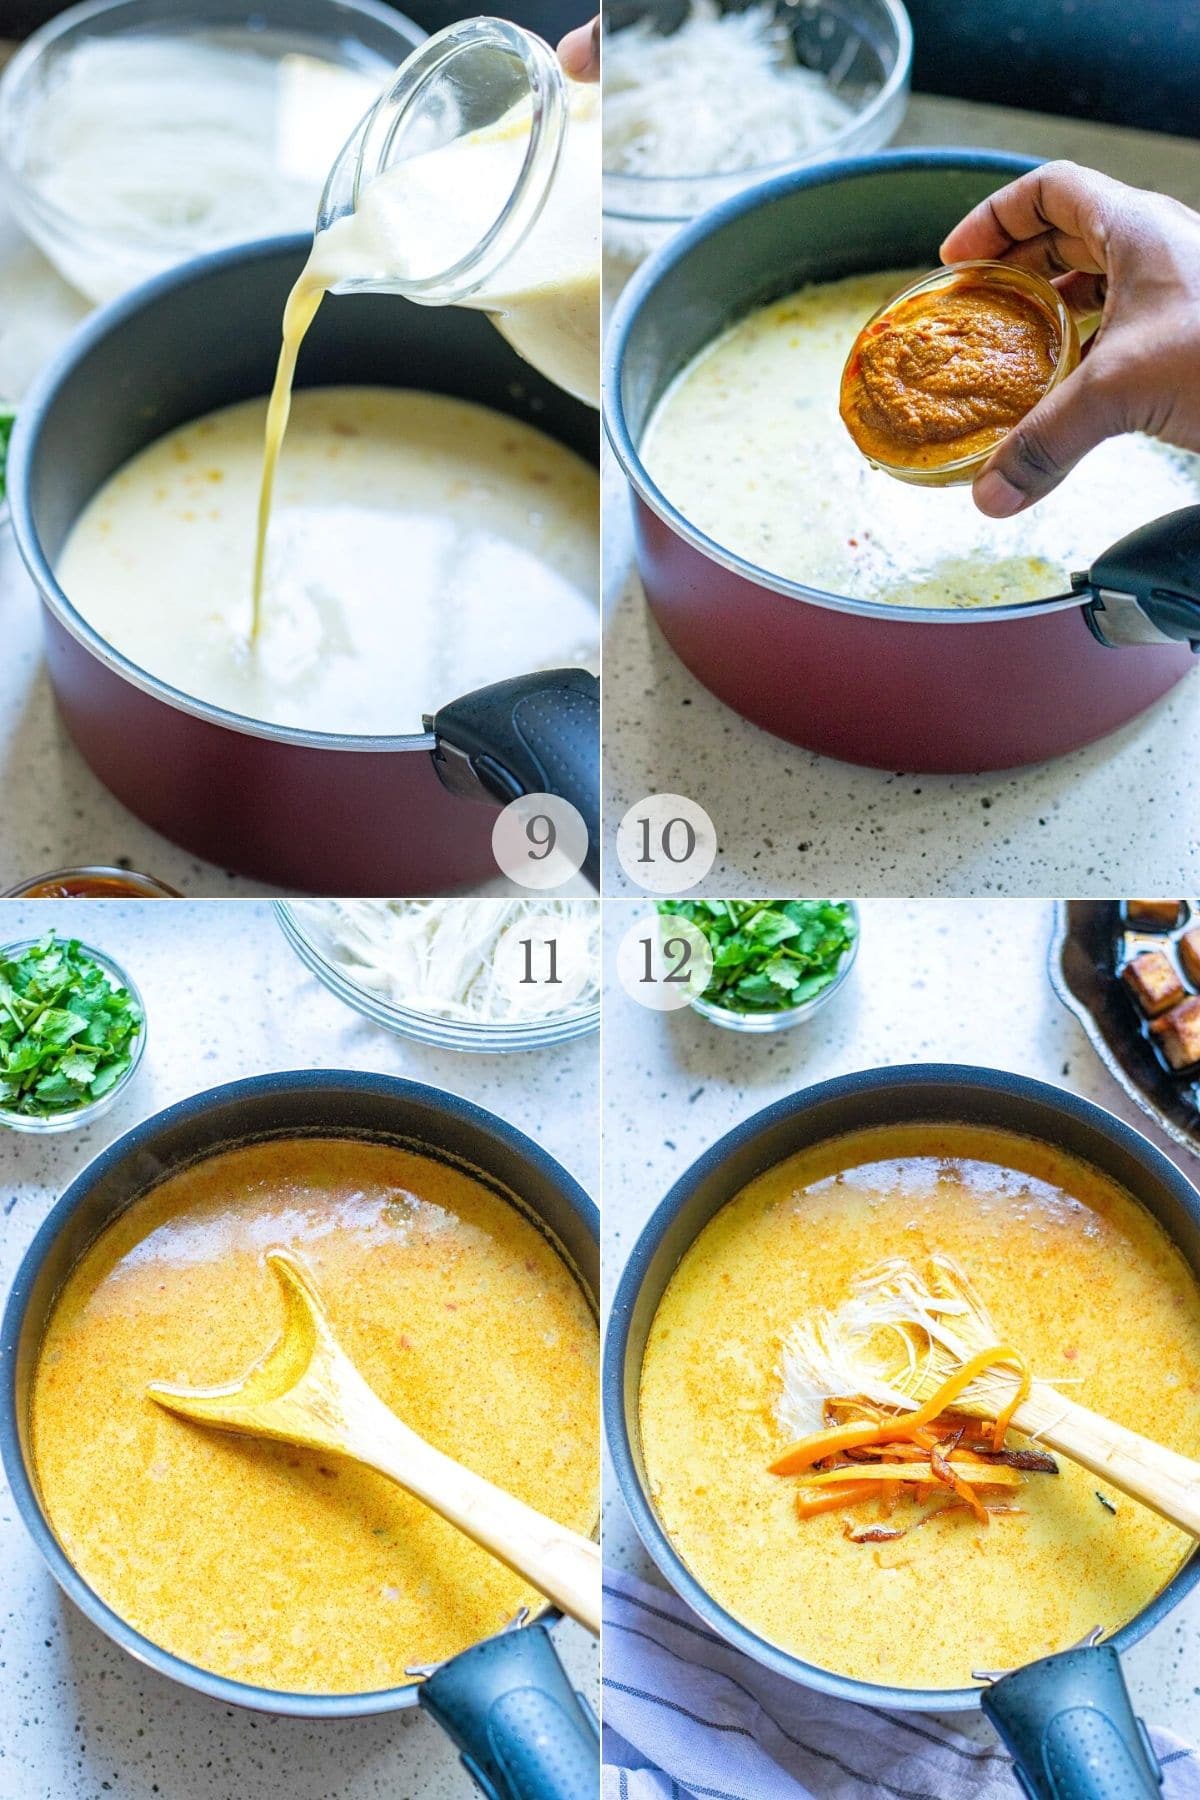 coconut curry soup recipe steps 9-12